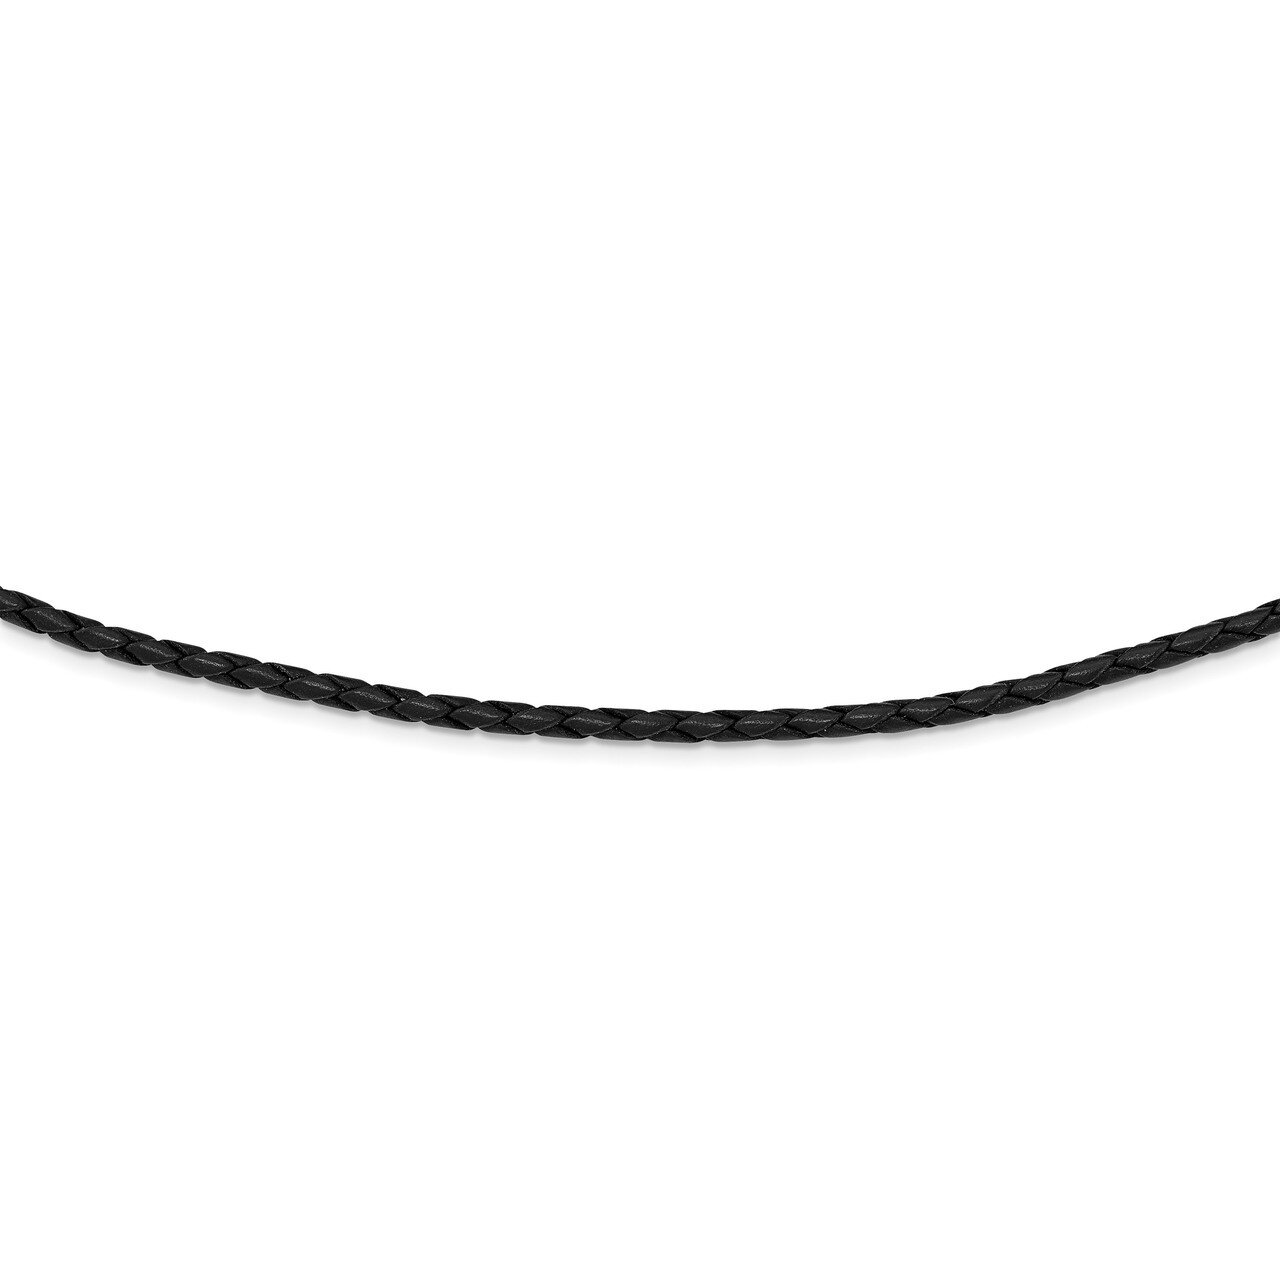 3mm Black Leather Braided Necklace 16 Inch Sterling Silver QK90-16